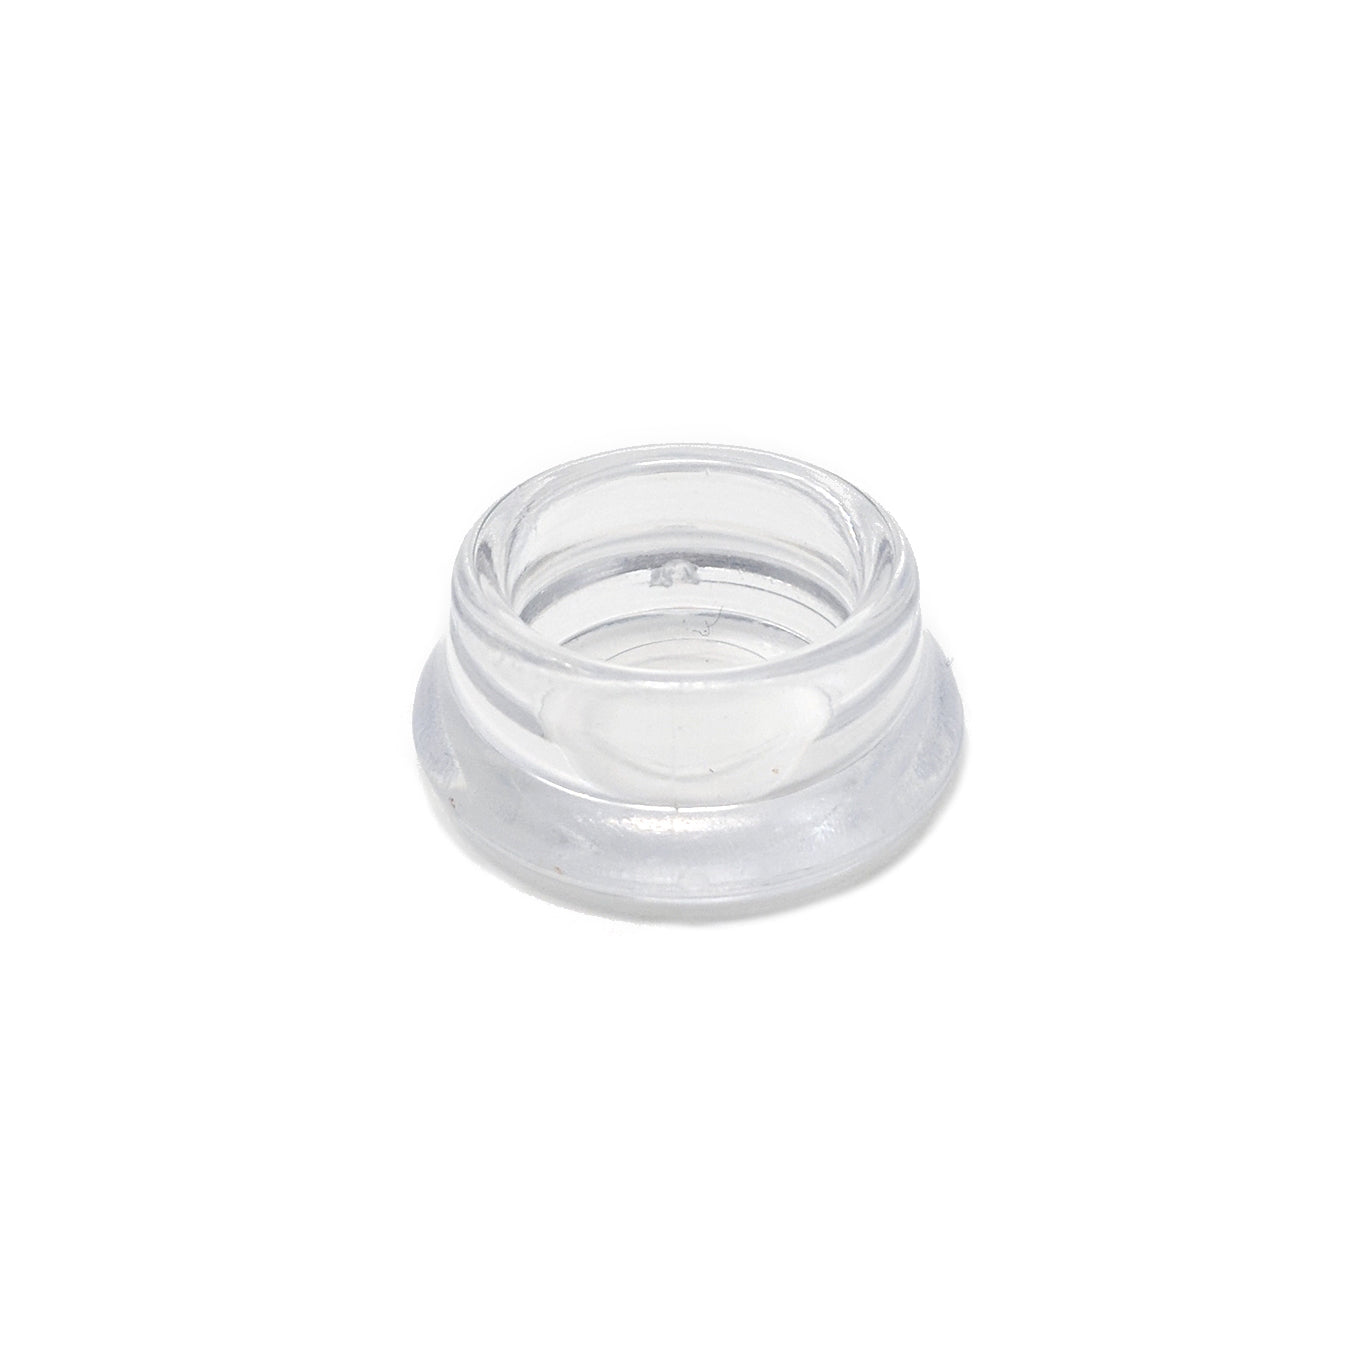 15mm Clear Round Furniture Leg Cups Floor Carpet Protector - Made in Germany - Keay Vital Parts